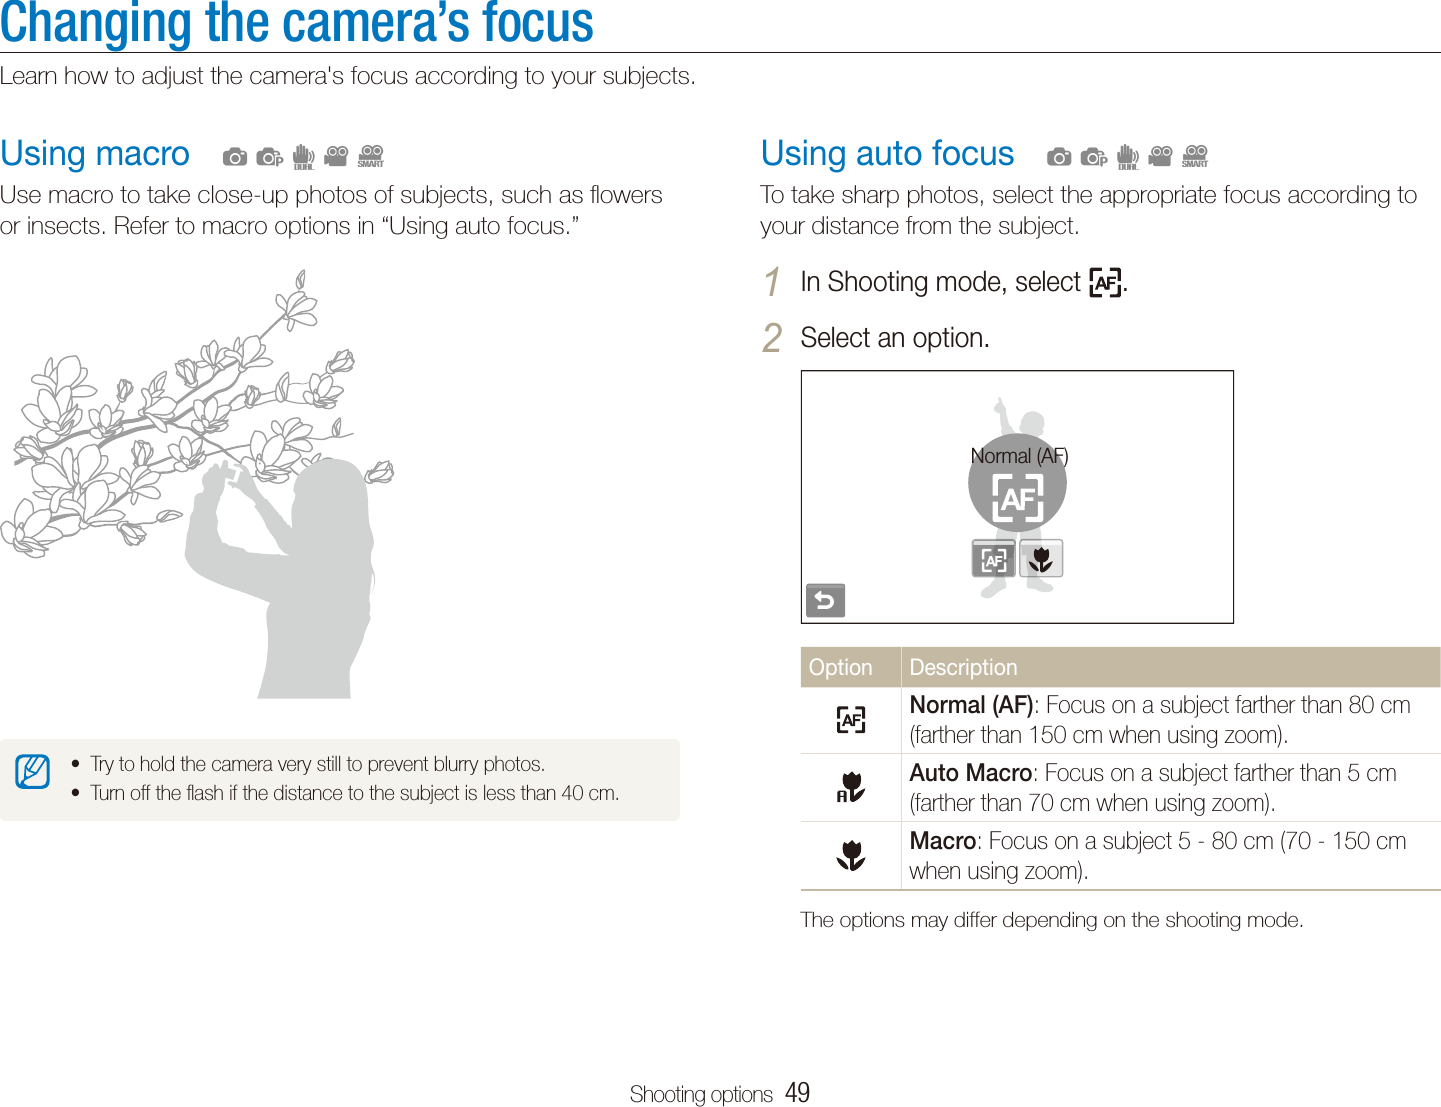 Shooting options  49Changing the camera’s focusLearn how to adjust the camera&apos;s focus according to your subjects.Using auto focusTo take sharp photos, select the appropriate focus according to your distance from the subject.In Shooting mode, select 1 .Select an option.2 Normal (AF)Option DescriptionNormal (AF): Focus on a subject farther than 80 cm (farther than 150 cm when using zoom).Auto Macro: Focus on a subject farther than 5 cm (farther than 70 cm when using zoom).Macro: Focus on a subject 5 - 80 cm (70 - 150 cm when using zoom).The options may differ depending on the shooting mode.  apdvDUsing macroUse macro to take close-up photos of subjects, such as ﬂowers or insects. Refer to macro options in “Using auto focus.”Try to hold the camera very still to prevent blurry photos.tTurn off the ﬂash if the distance to the subject is less than 40 cm.t  apdvD